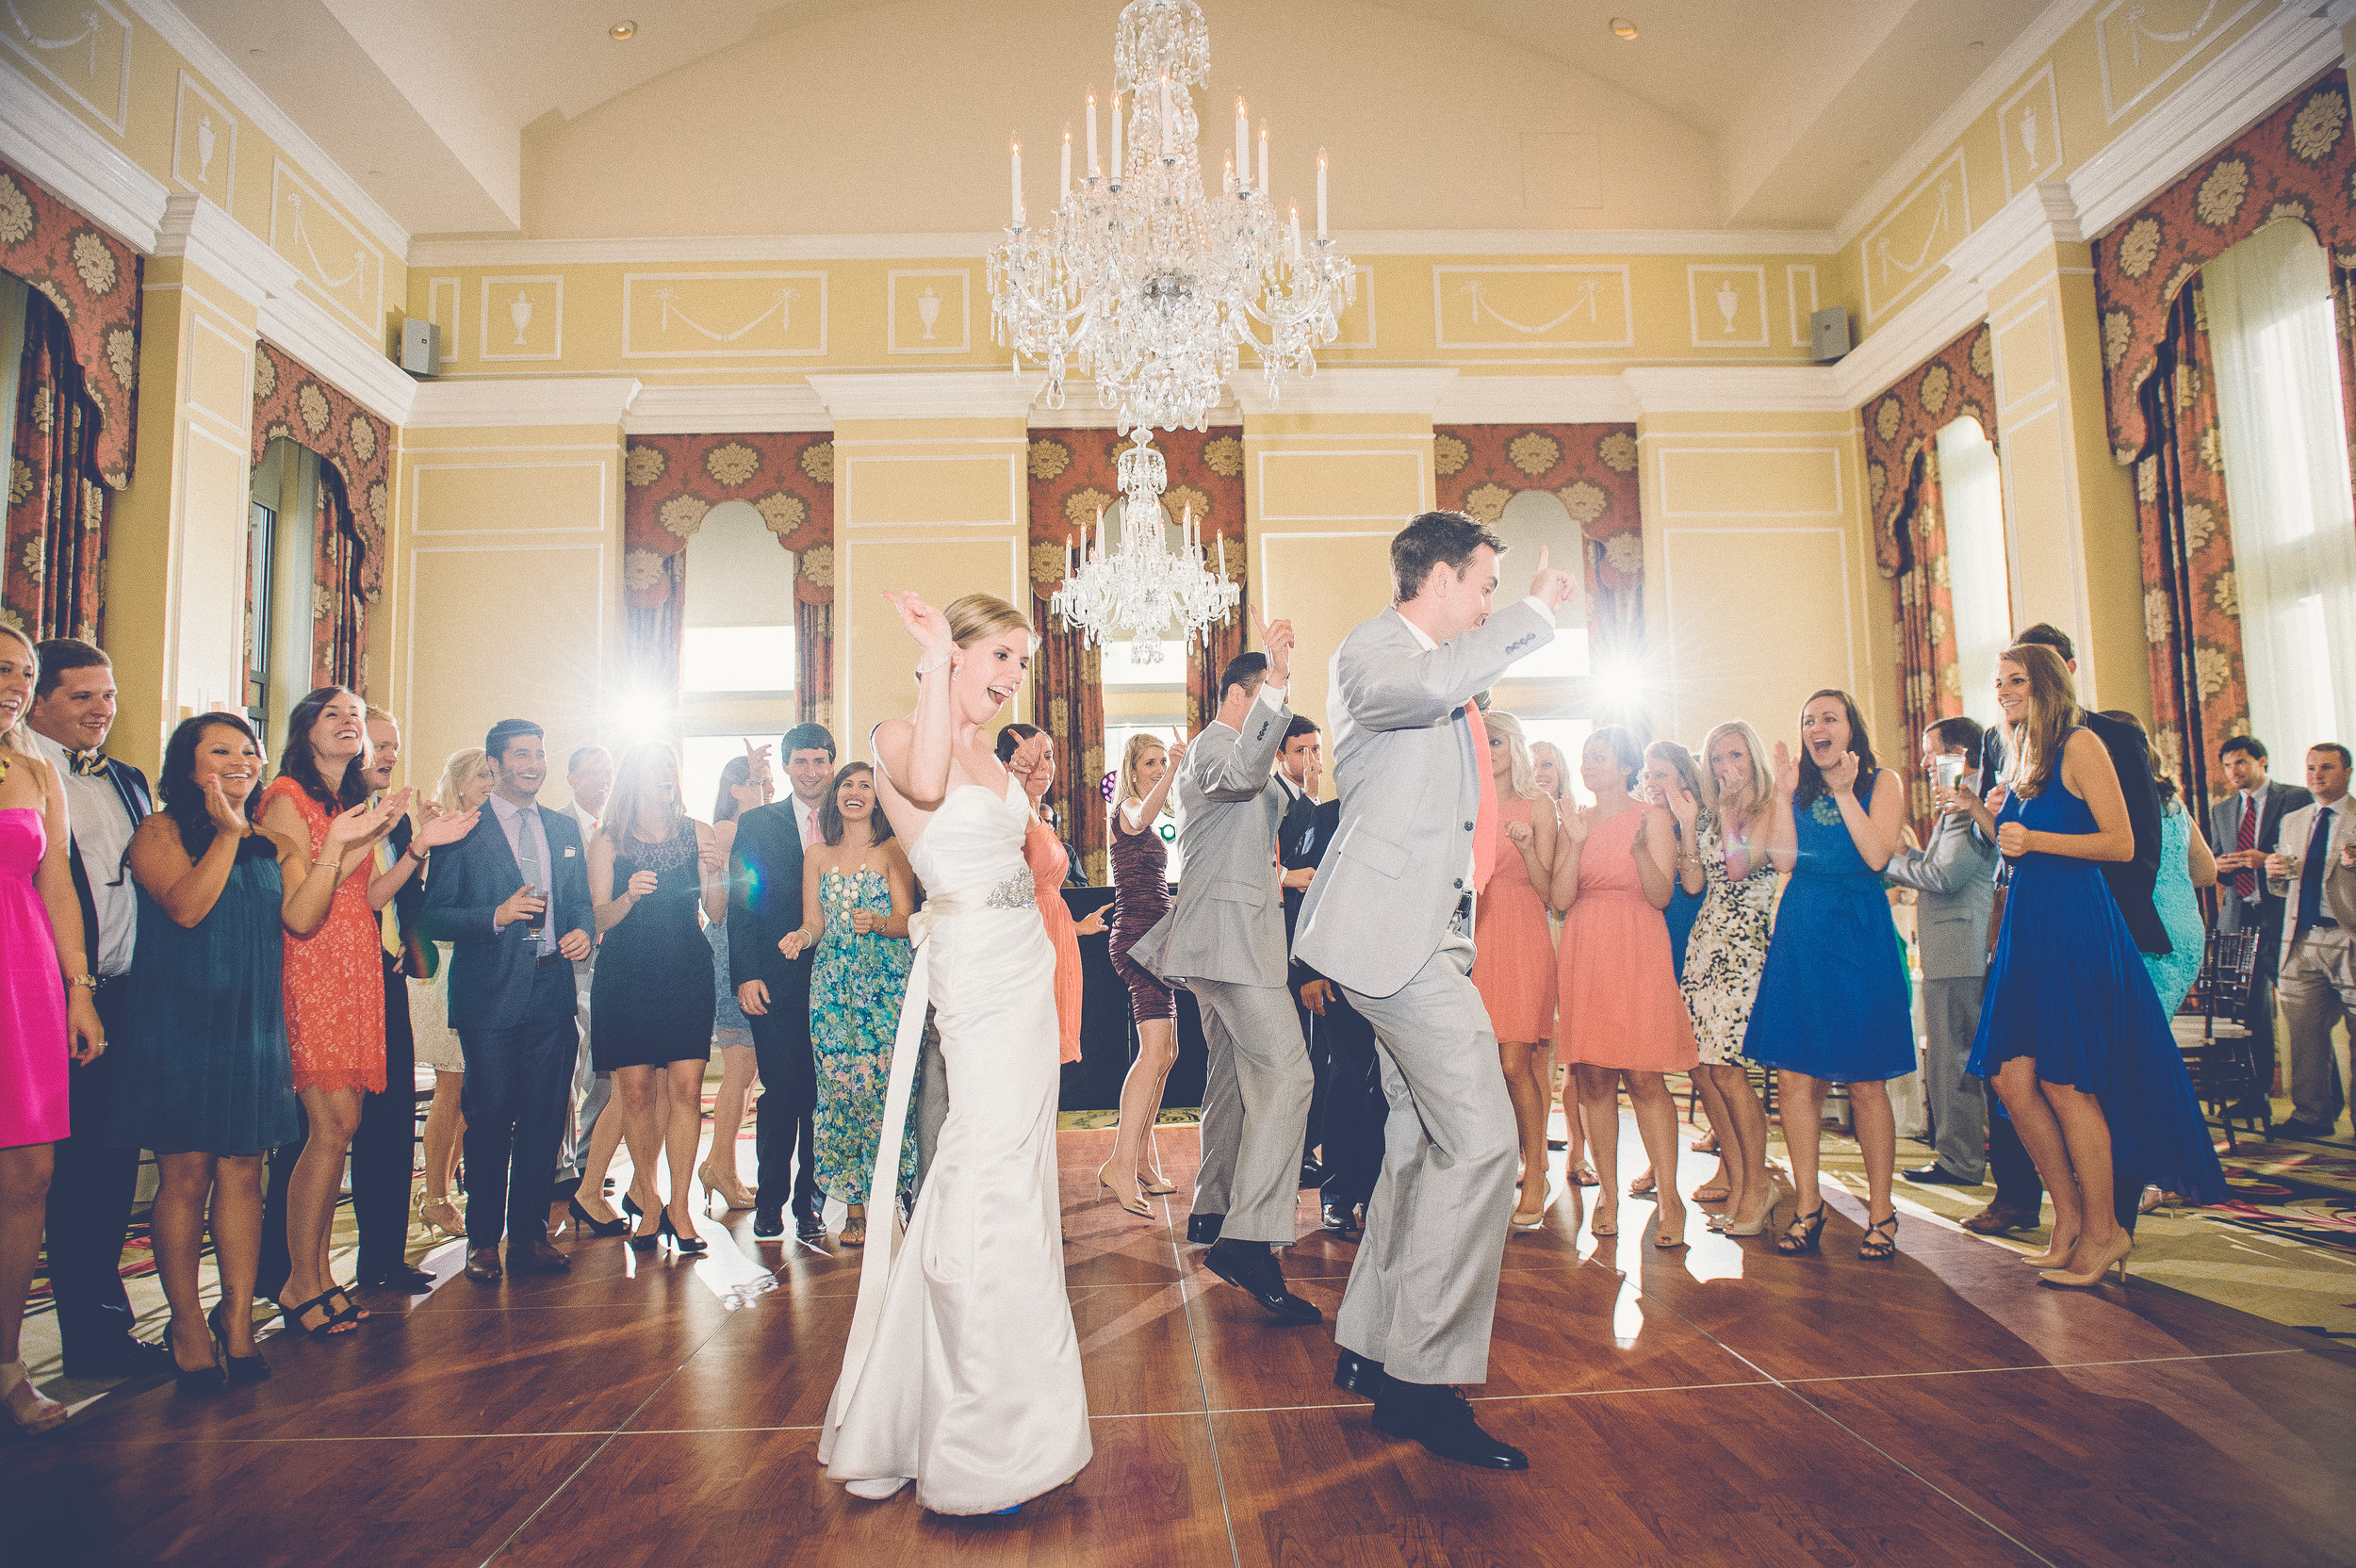 Weddings in Charlotte NC | Wedding Planner for the Southeast | Erica Stawick Events